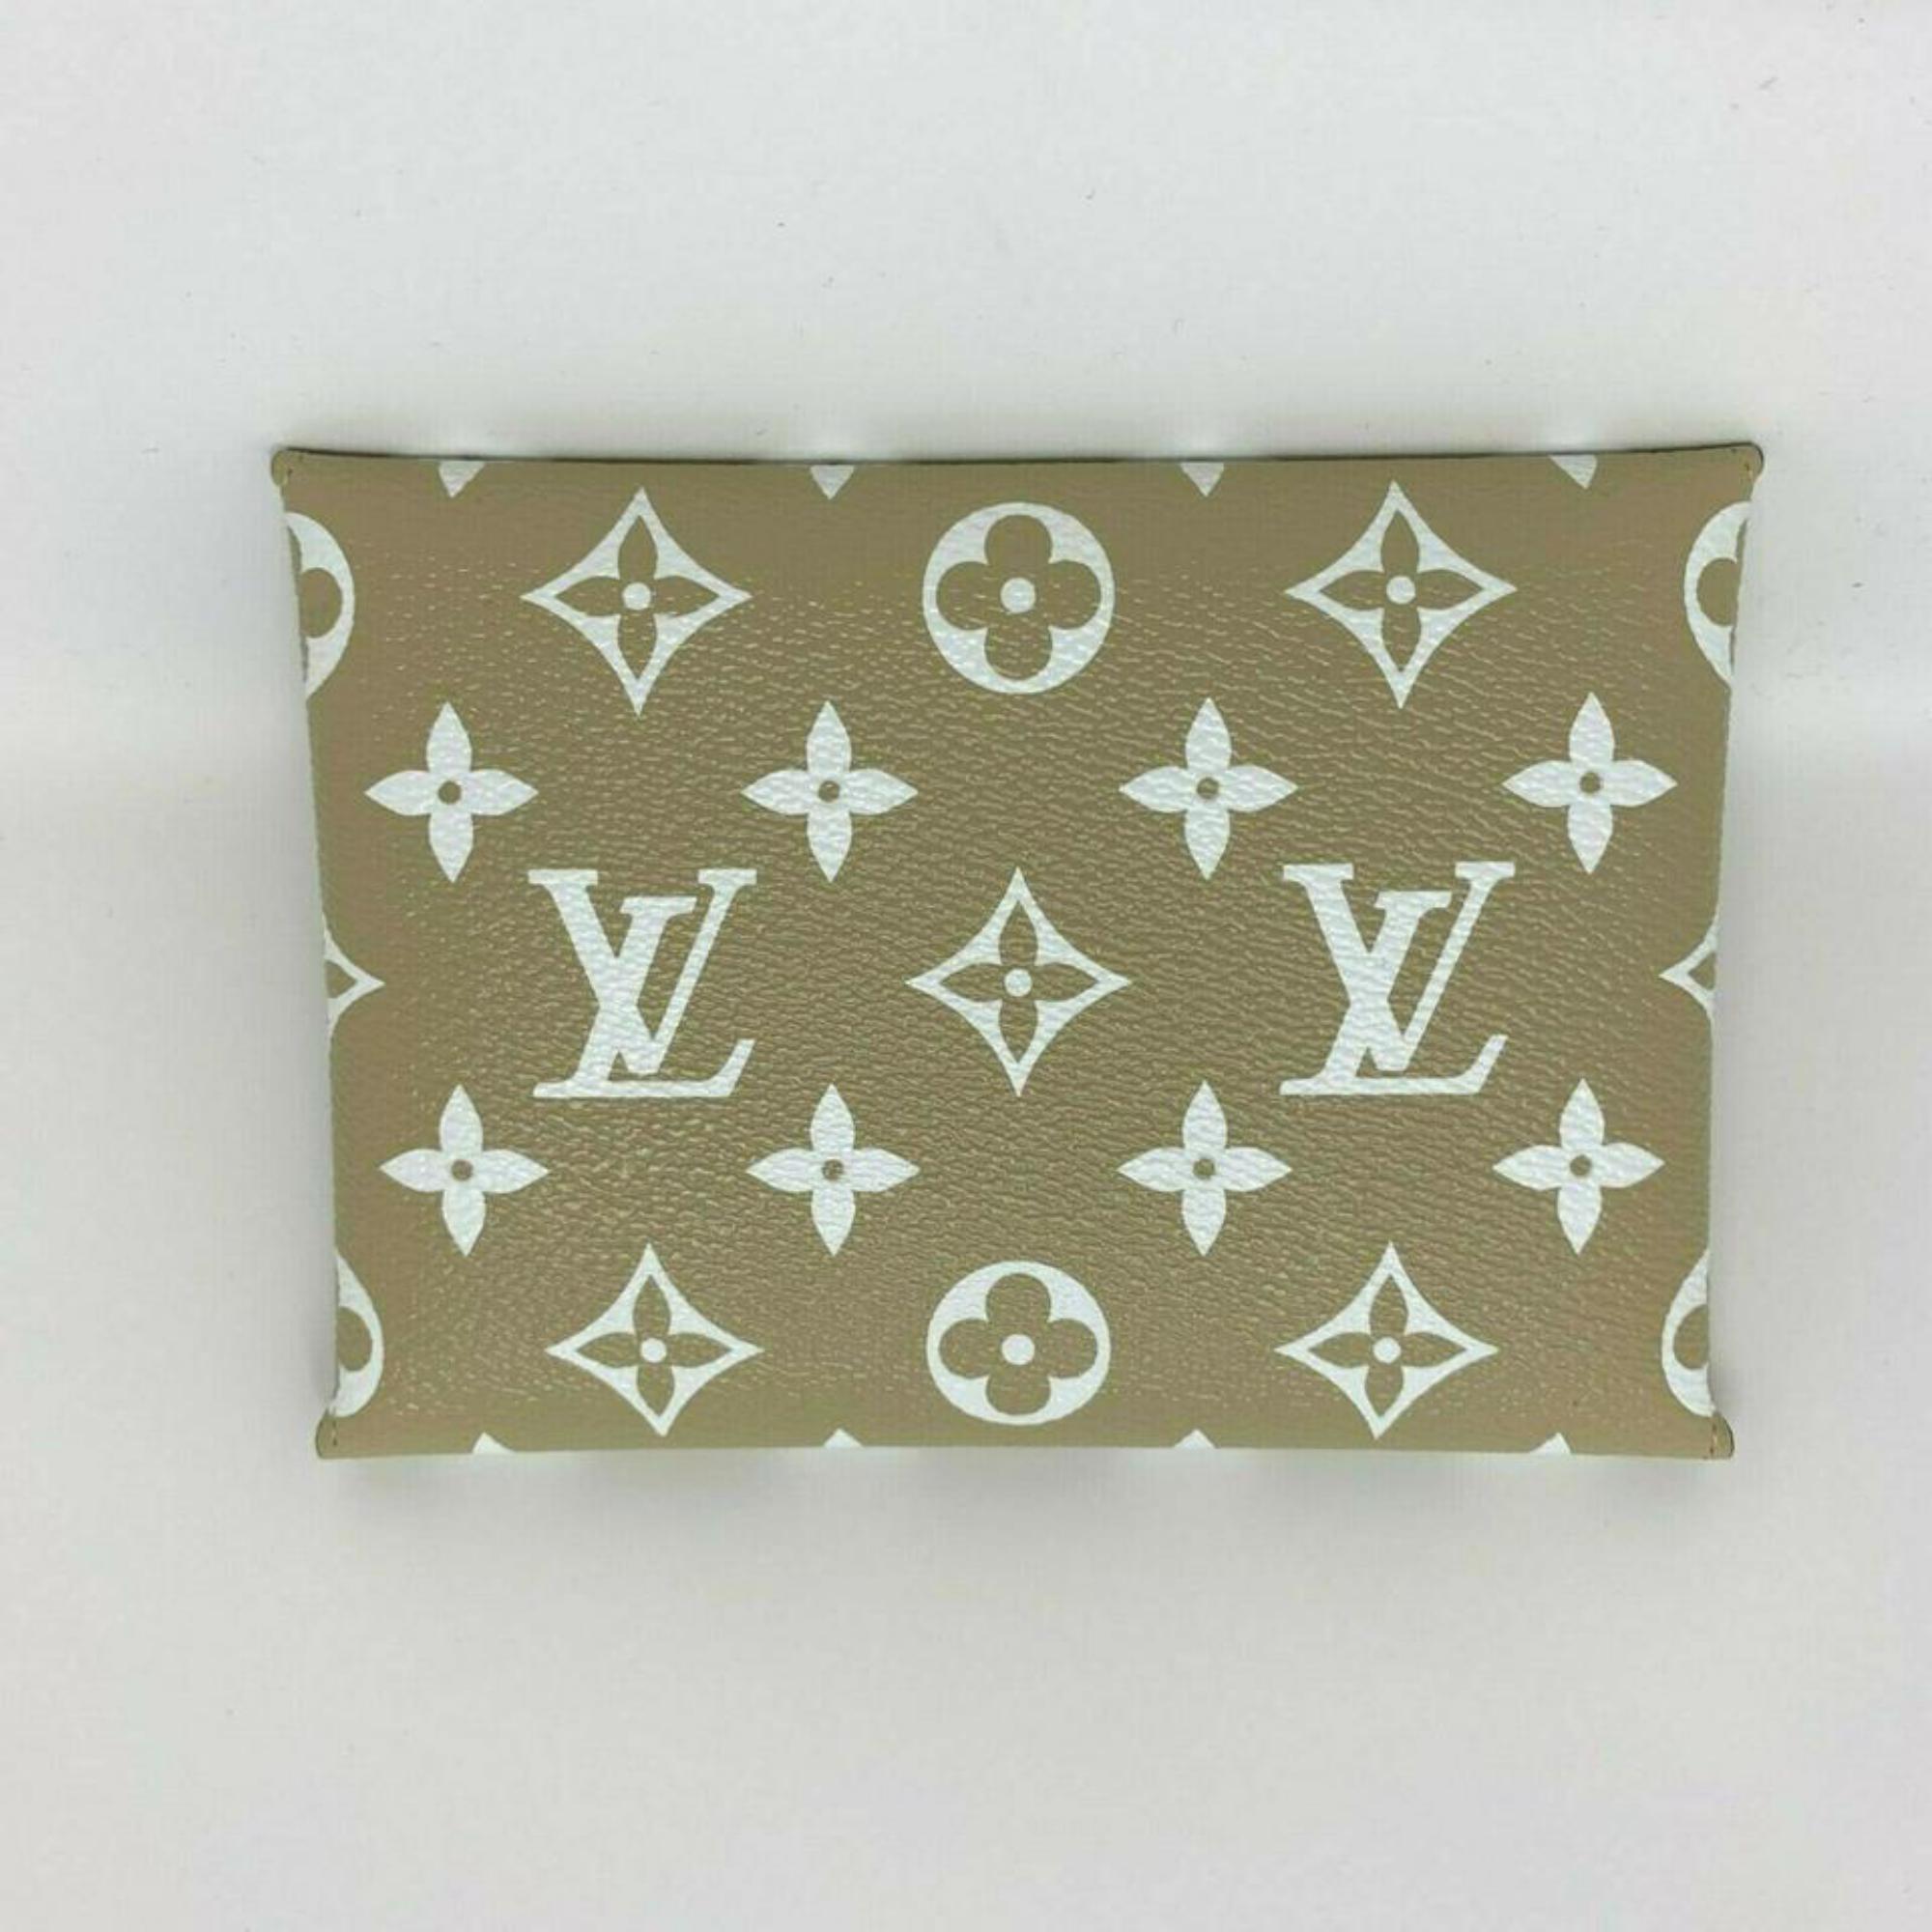 Louis Vuitton Beige Medium Ss19 Limited Edition Giant Kirigami Pouch 870619  For Sale 7